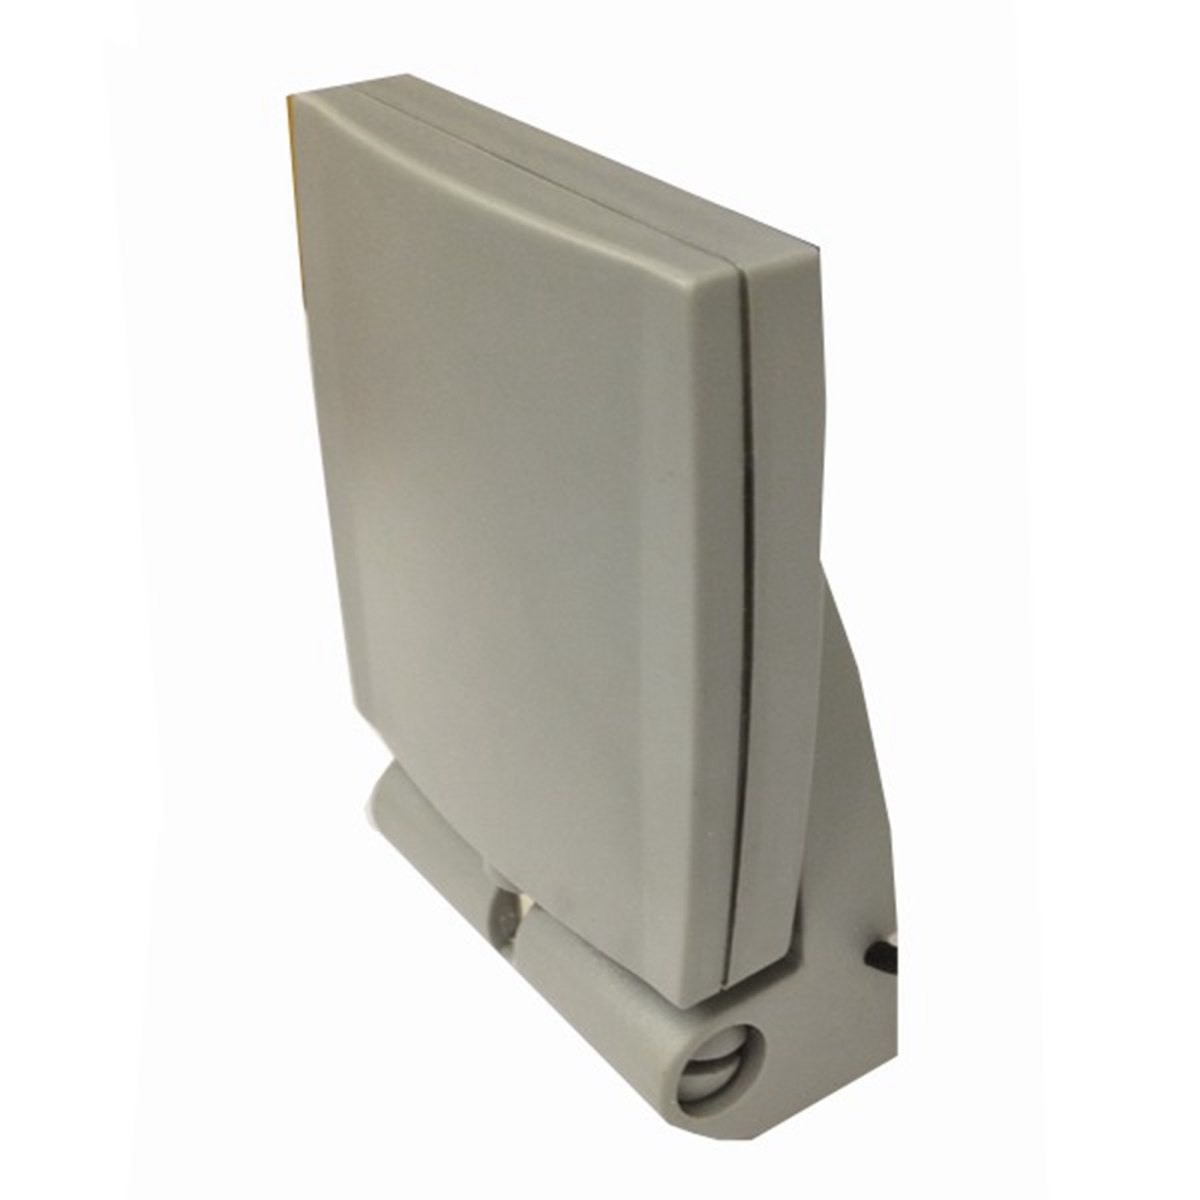 Picture of Turmode WAP58142 Panel WiFi Antenna for 5.8GHz